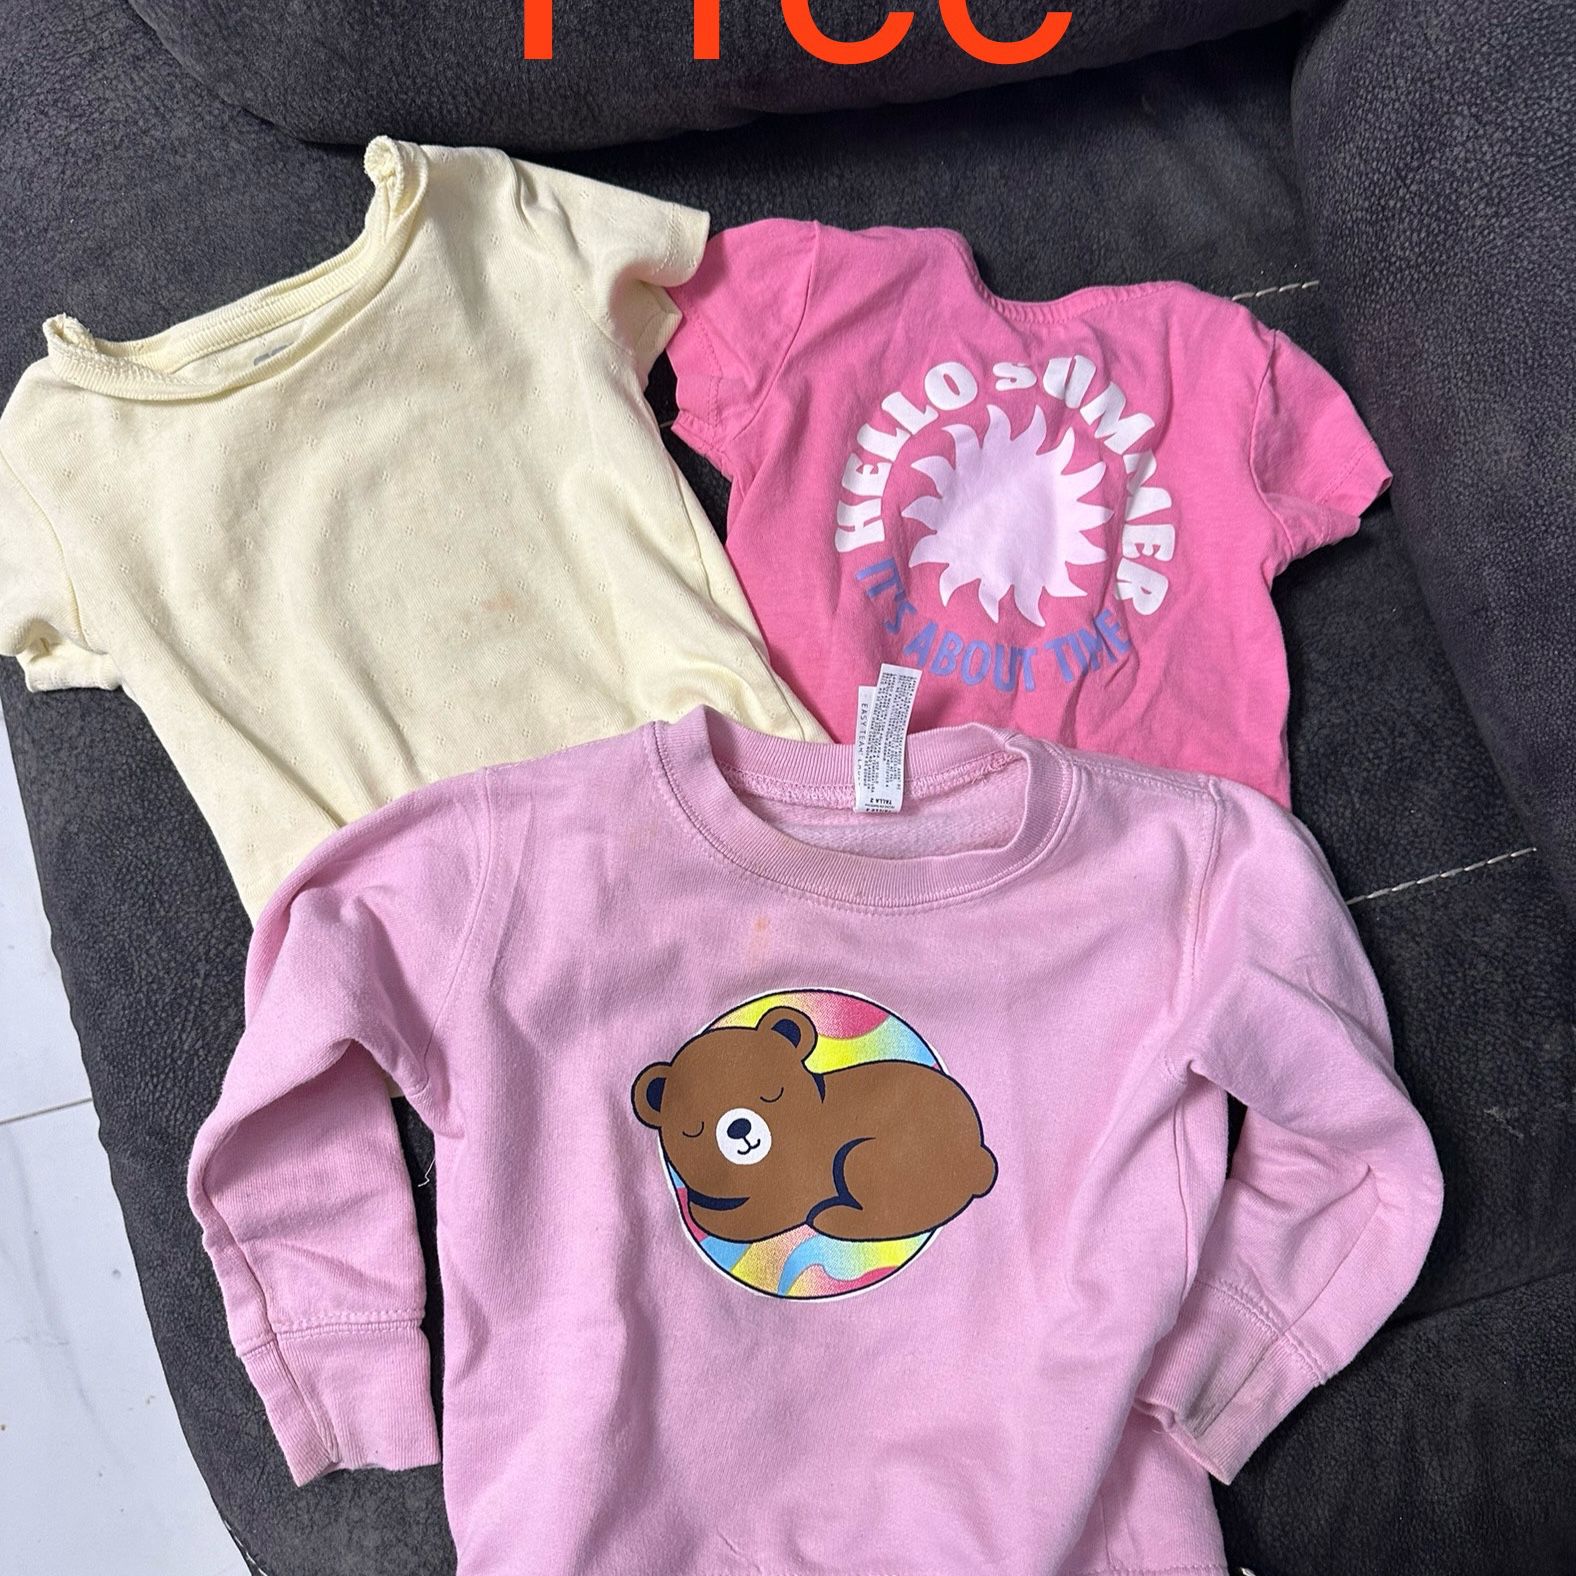 Free!! Baby Clothes Girls Size 18-24